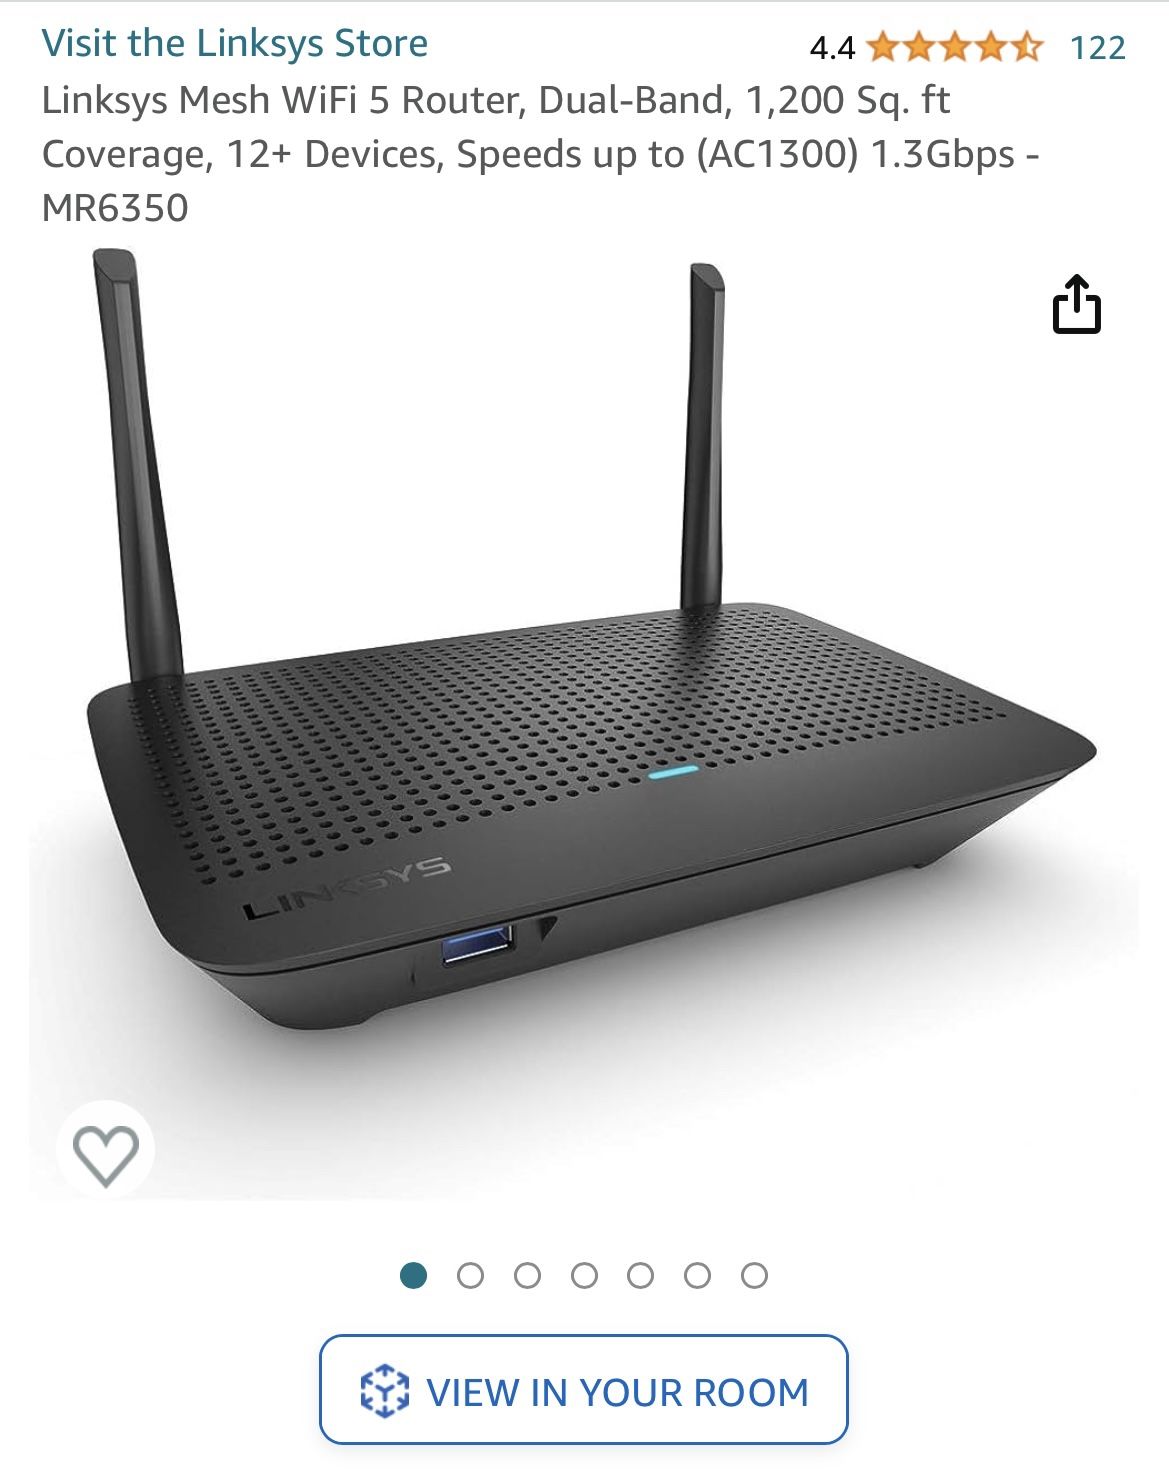 Linksys Mesh Router MR6350